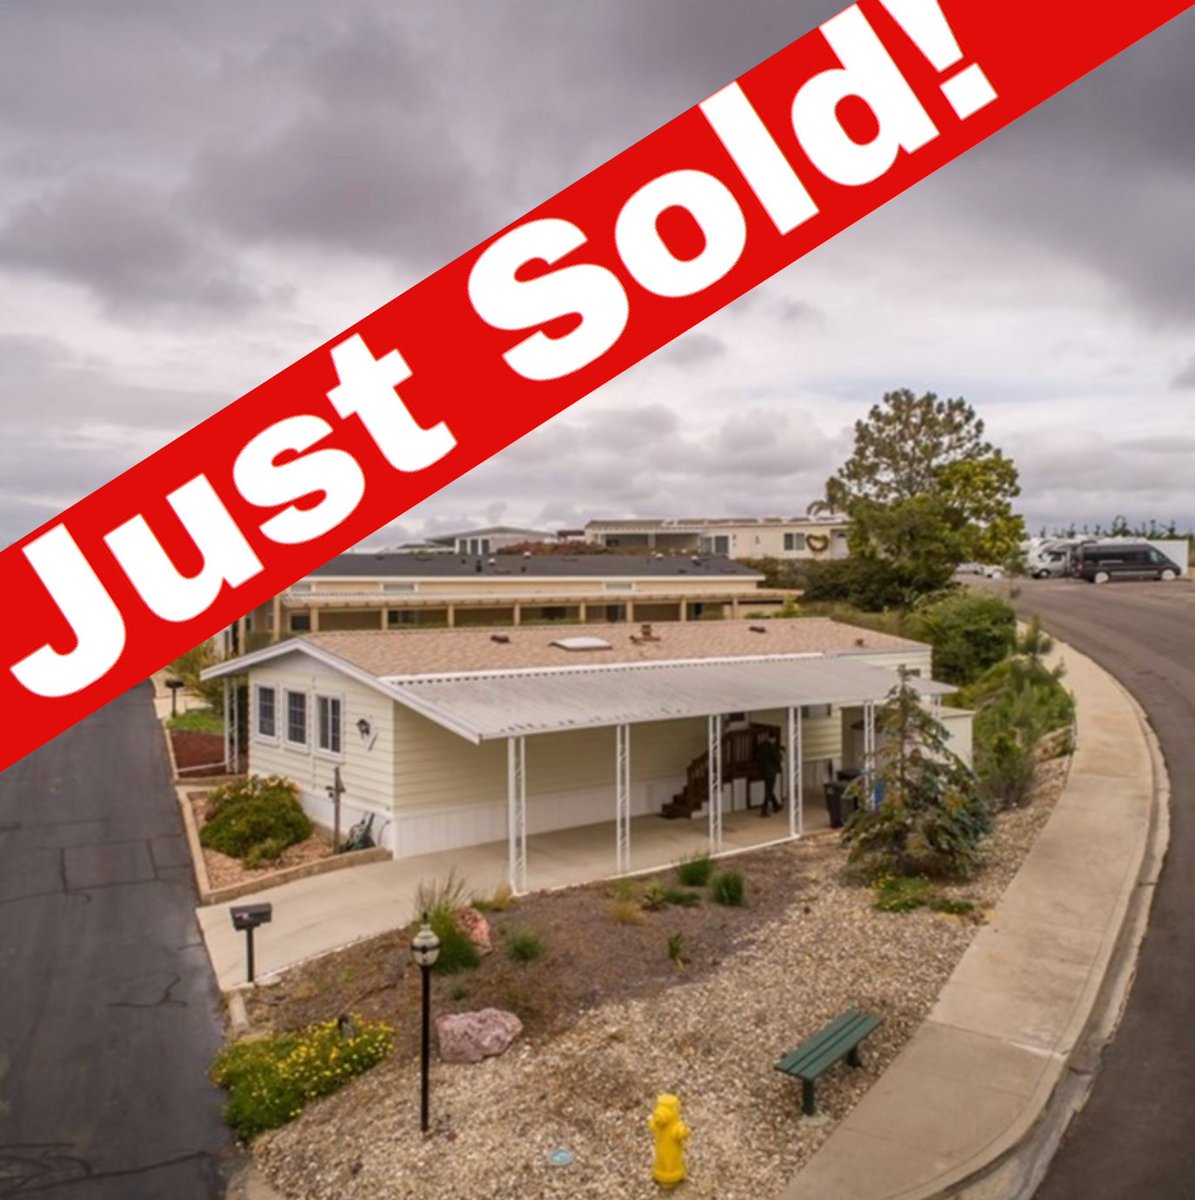 We did again! Another SOLD!
Represented Buyer

Serving the Central Coast with over 900 Transaction sides

**Putting the 'REAL' back in REAL Estate!**

Richard Gonzalez
Compass
(805) 268-4407
Richard@RichardHasHomes.com

#richardhashomes #centalcoast #arroyogrande #agentsofcompass